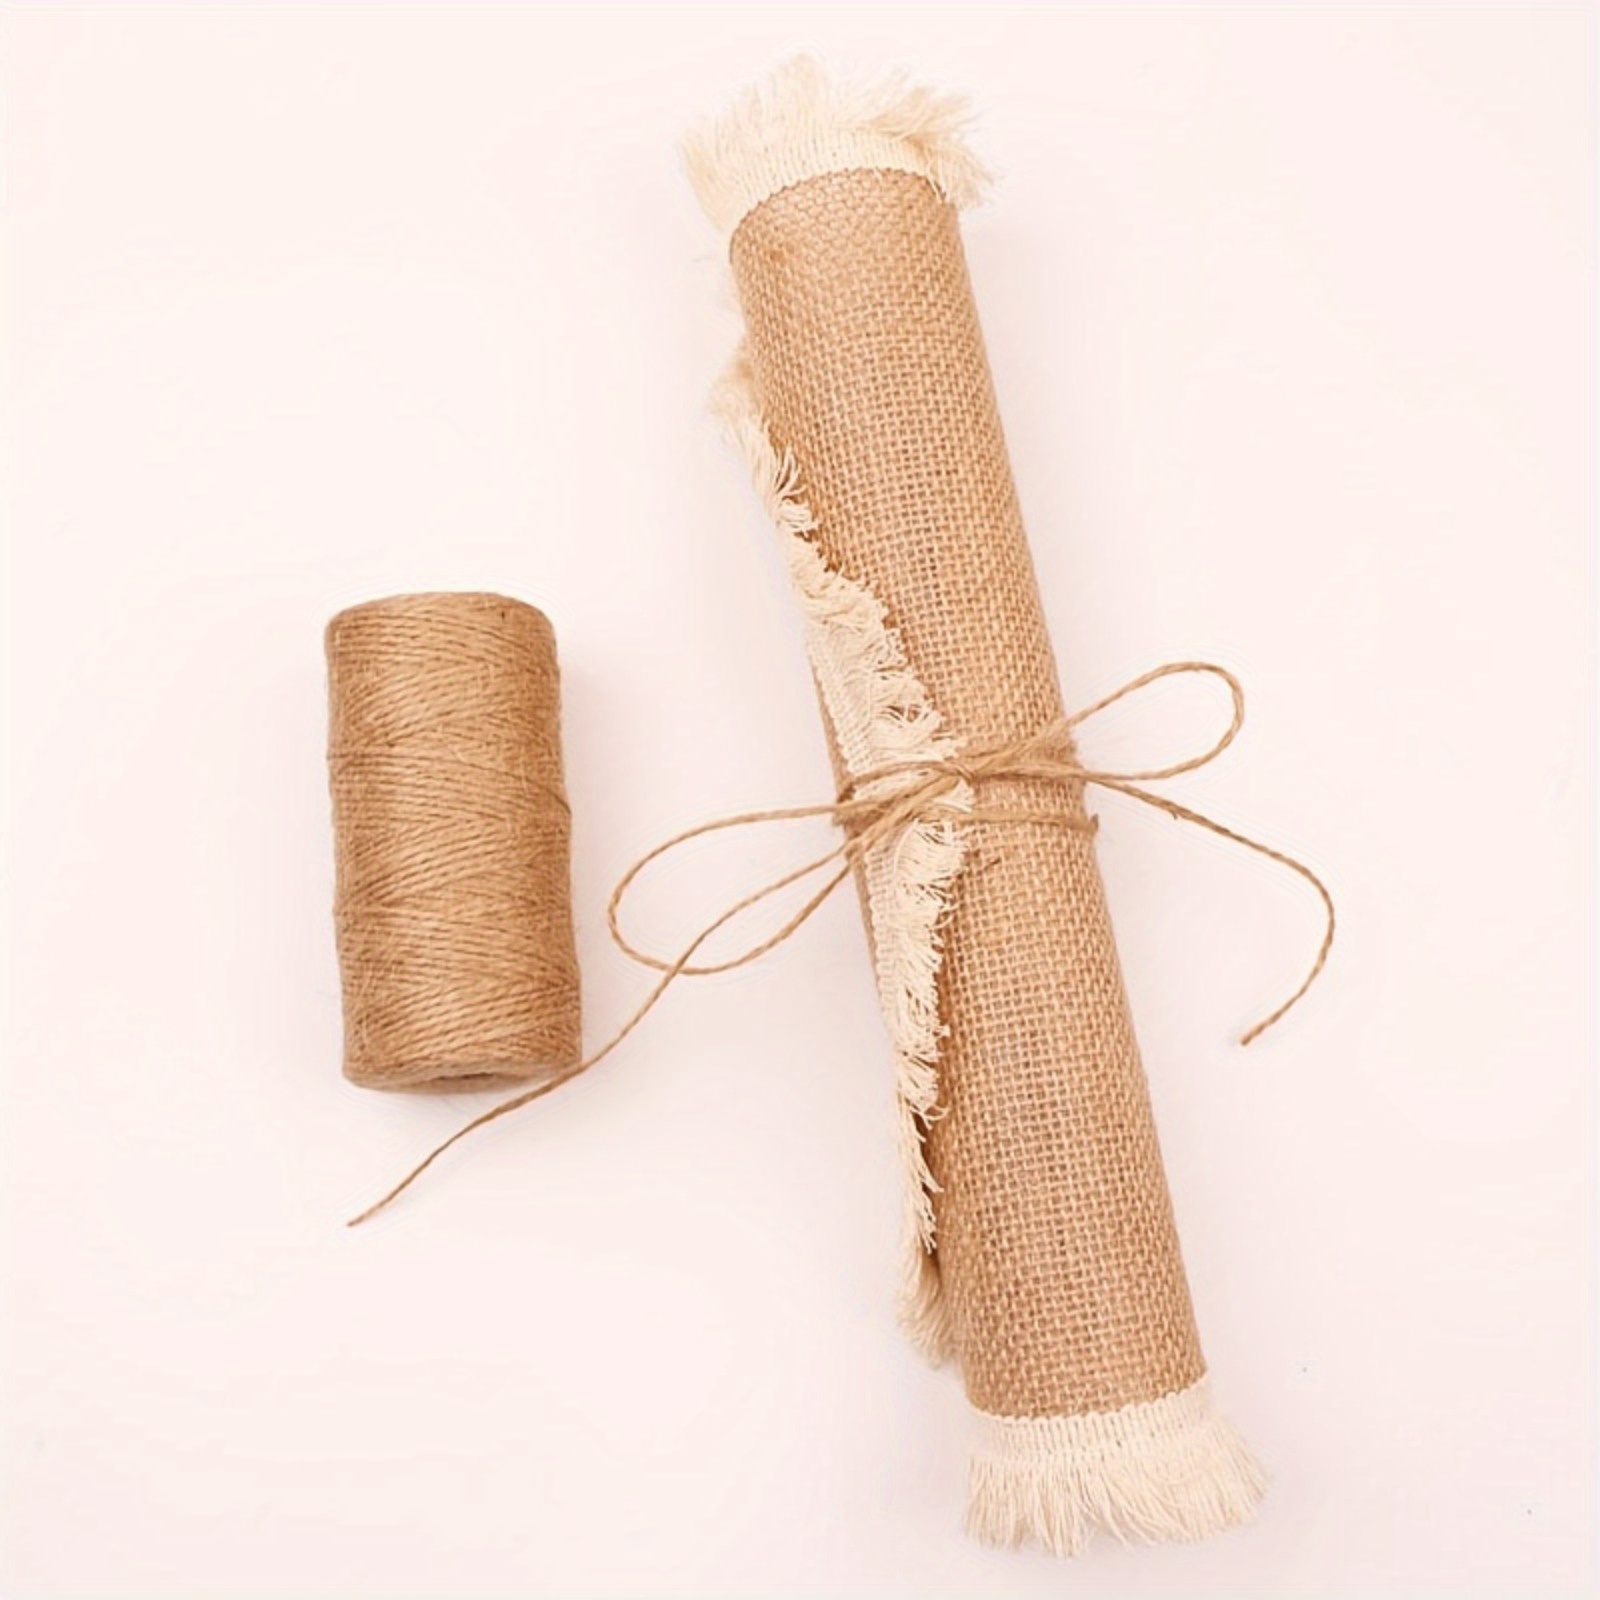 Natural Jute Twine Long Twine For Crafts, Gift Wrapping, Gardening